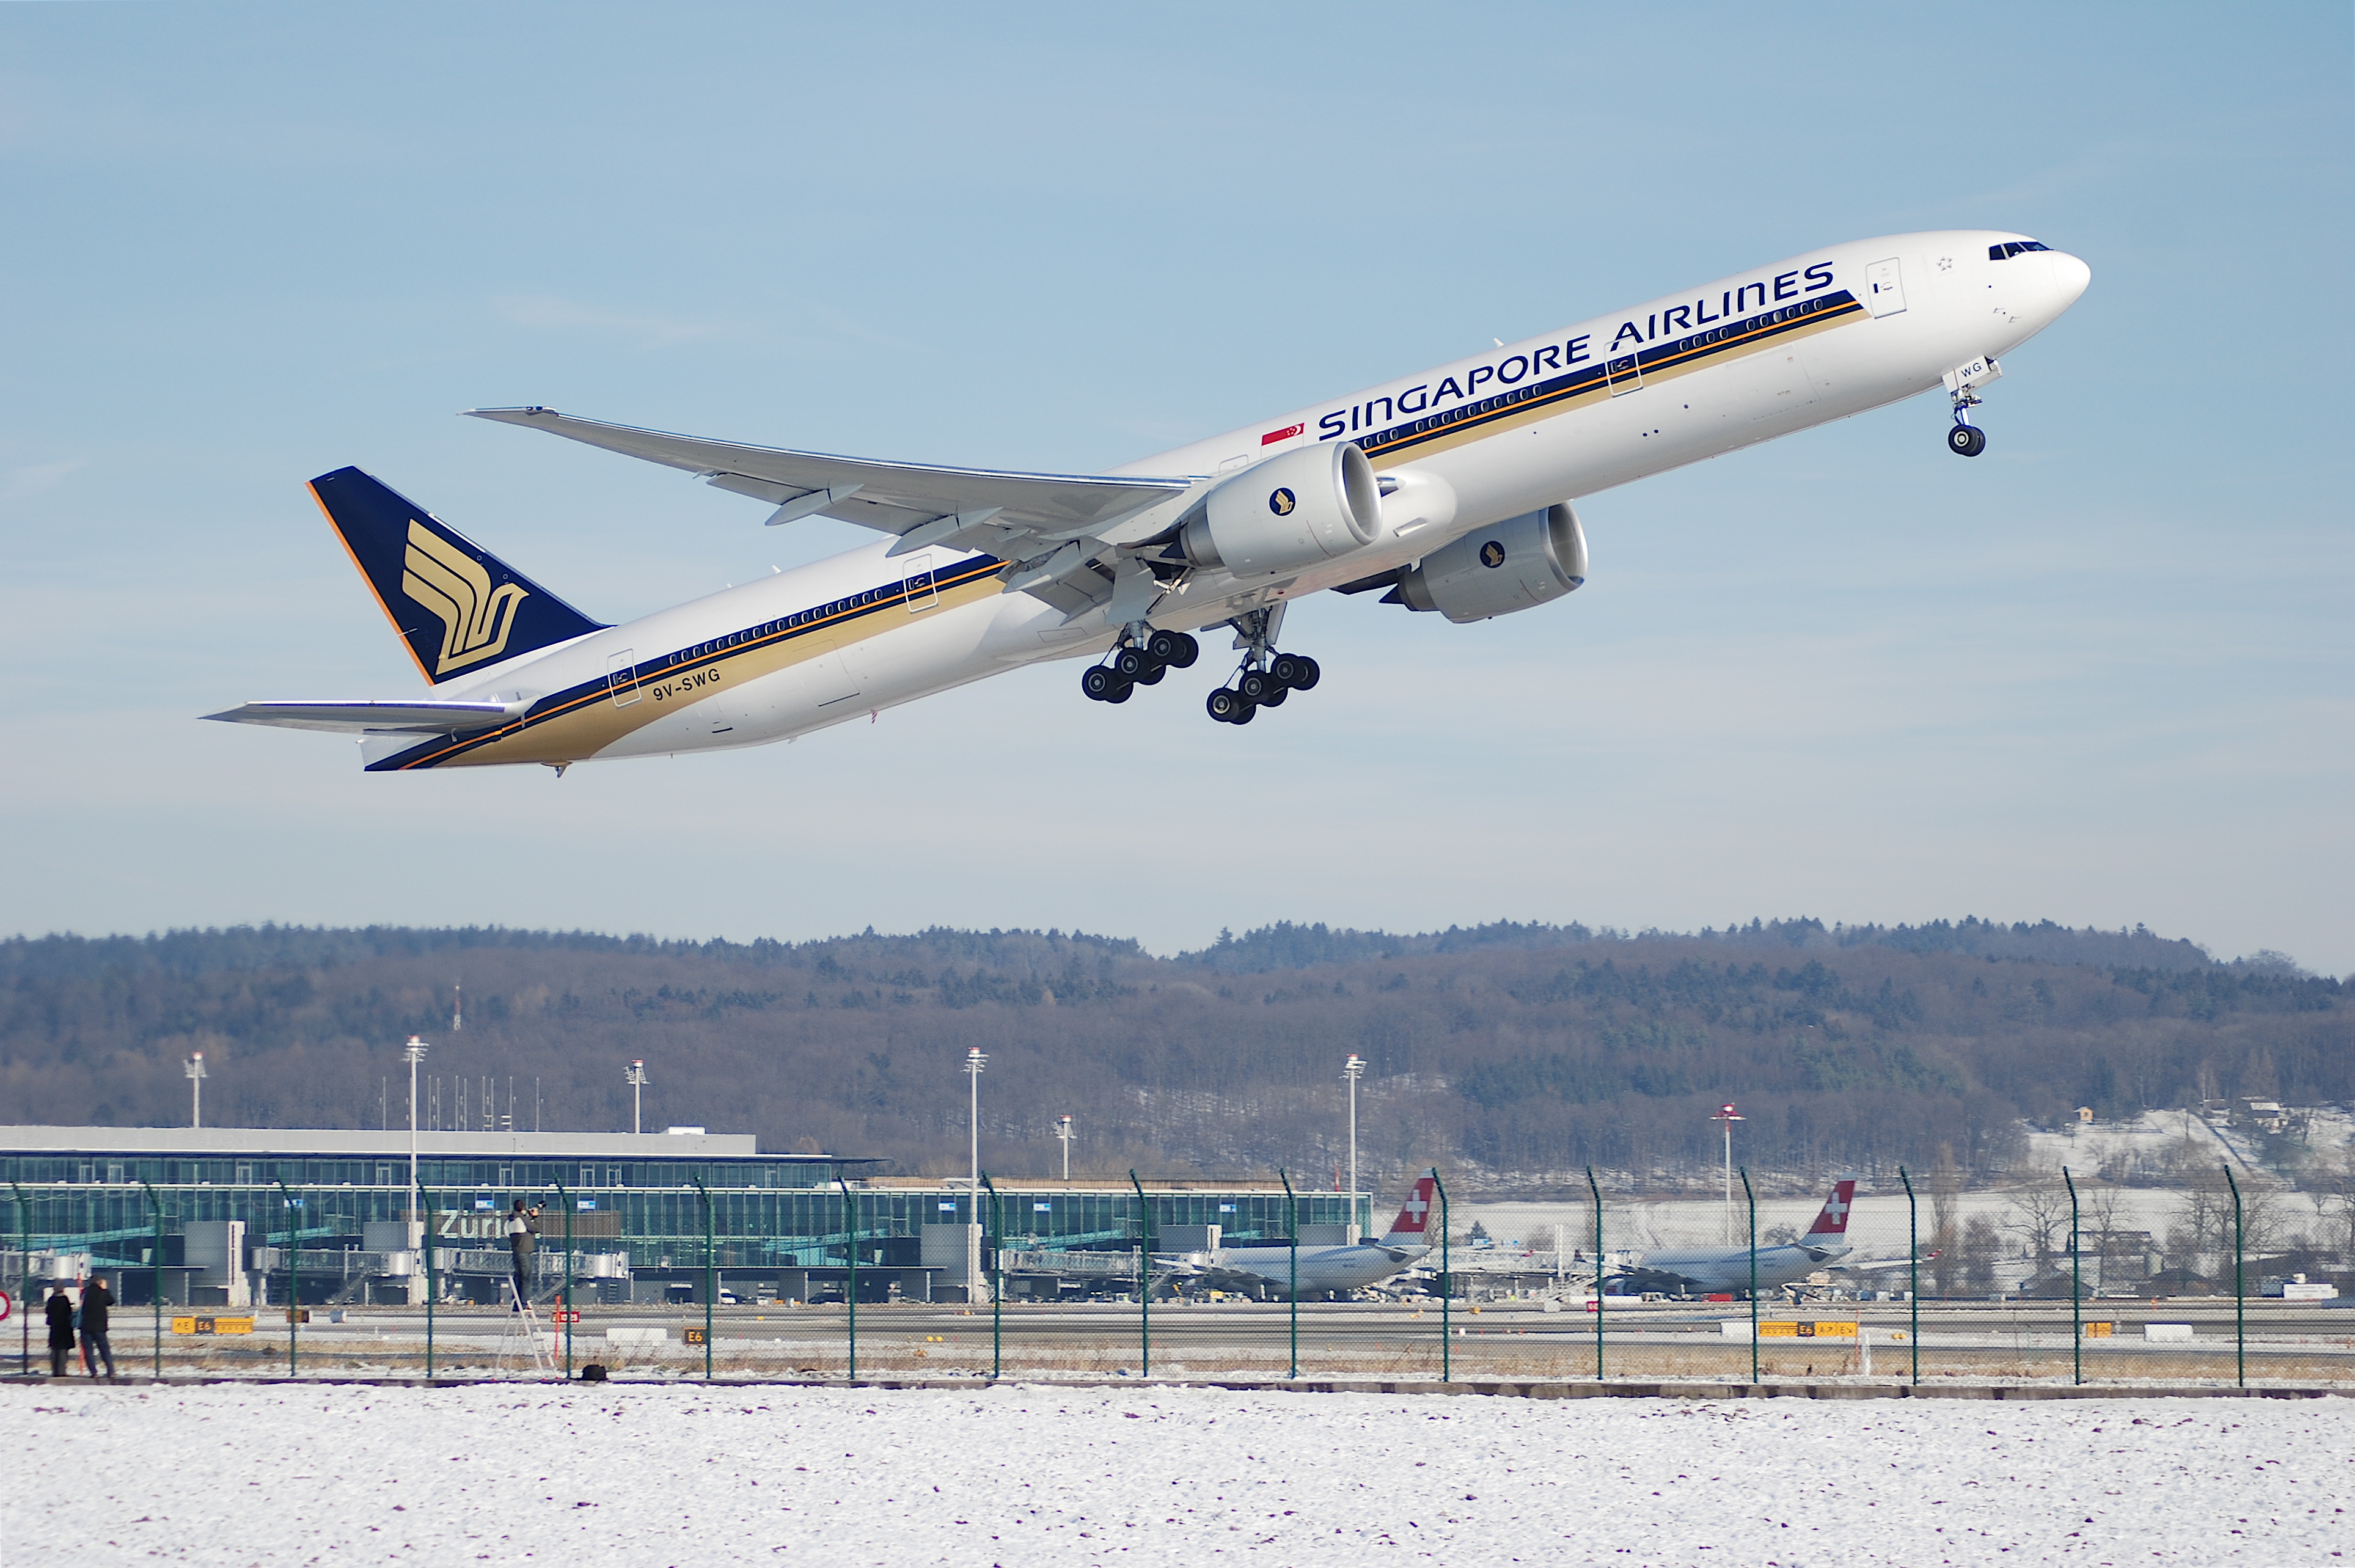 Singapore Airlines Boeing 777-300, 9V-SWG@ZRH,28.01.2007-449br - Flickr - Aero Icarus